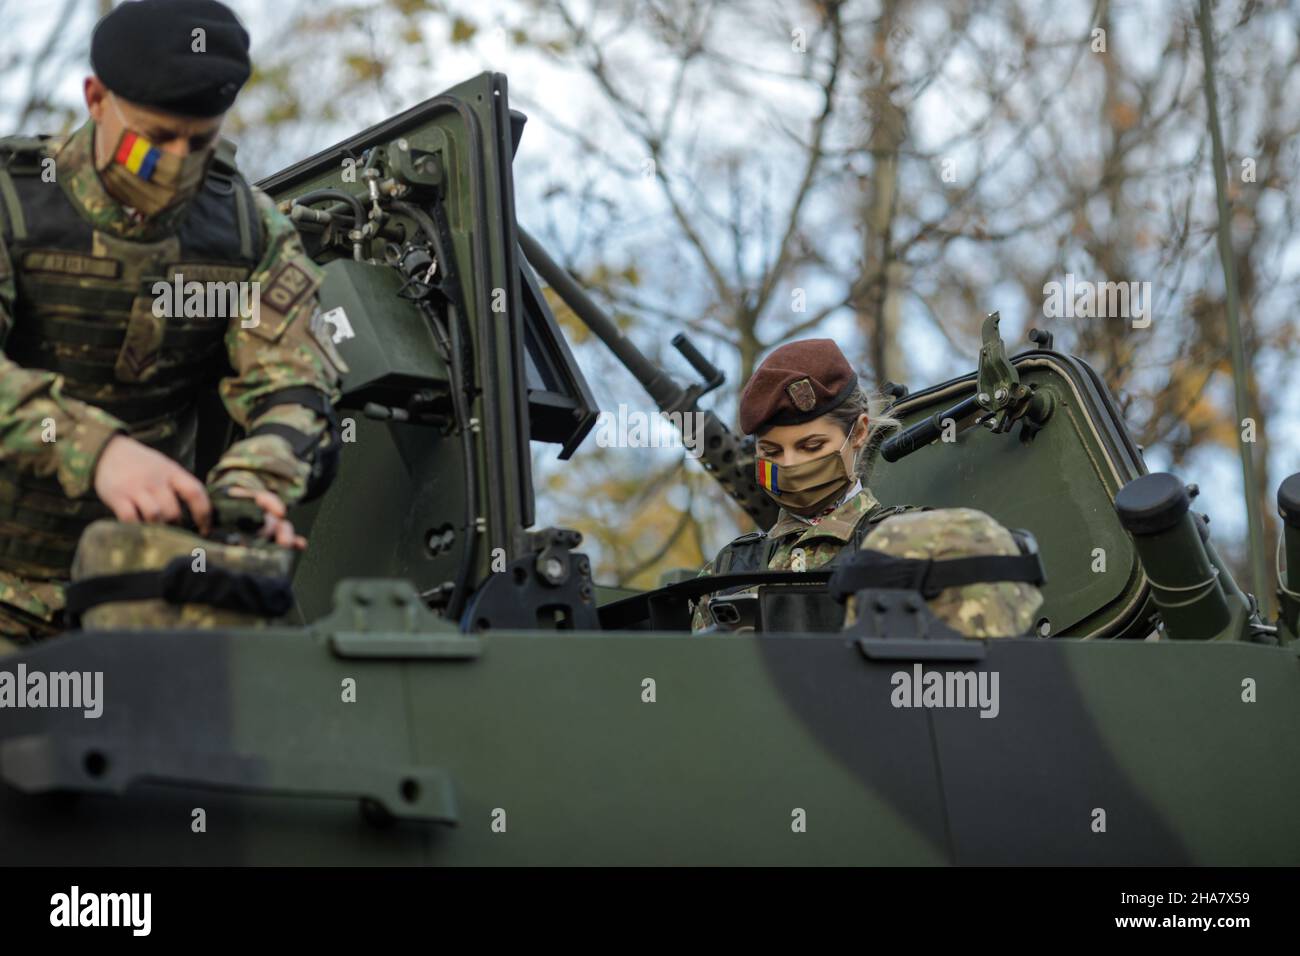 Bucharest, Romania - 1 December, 2021: Romanian army soldiers on Piranha V armored vehicles prepare for the Romanian national day military parade. Stock Photo